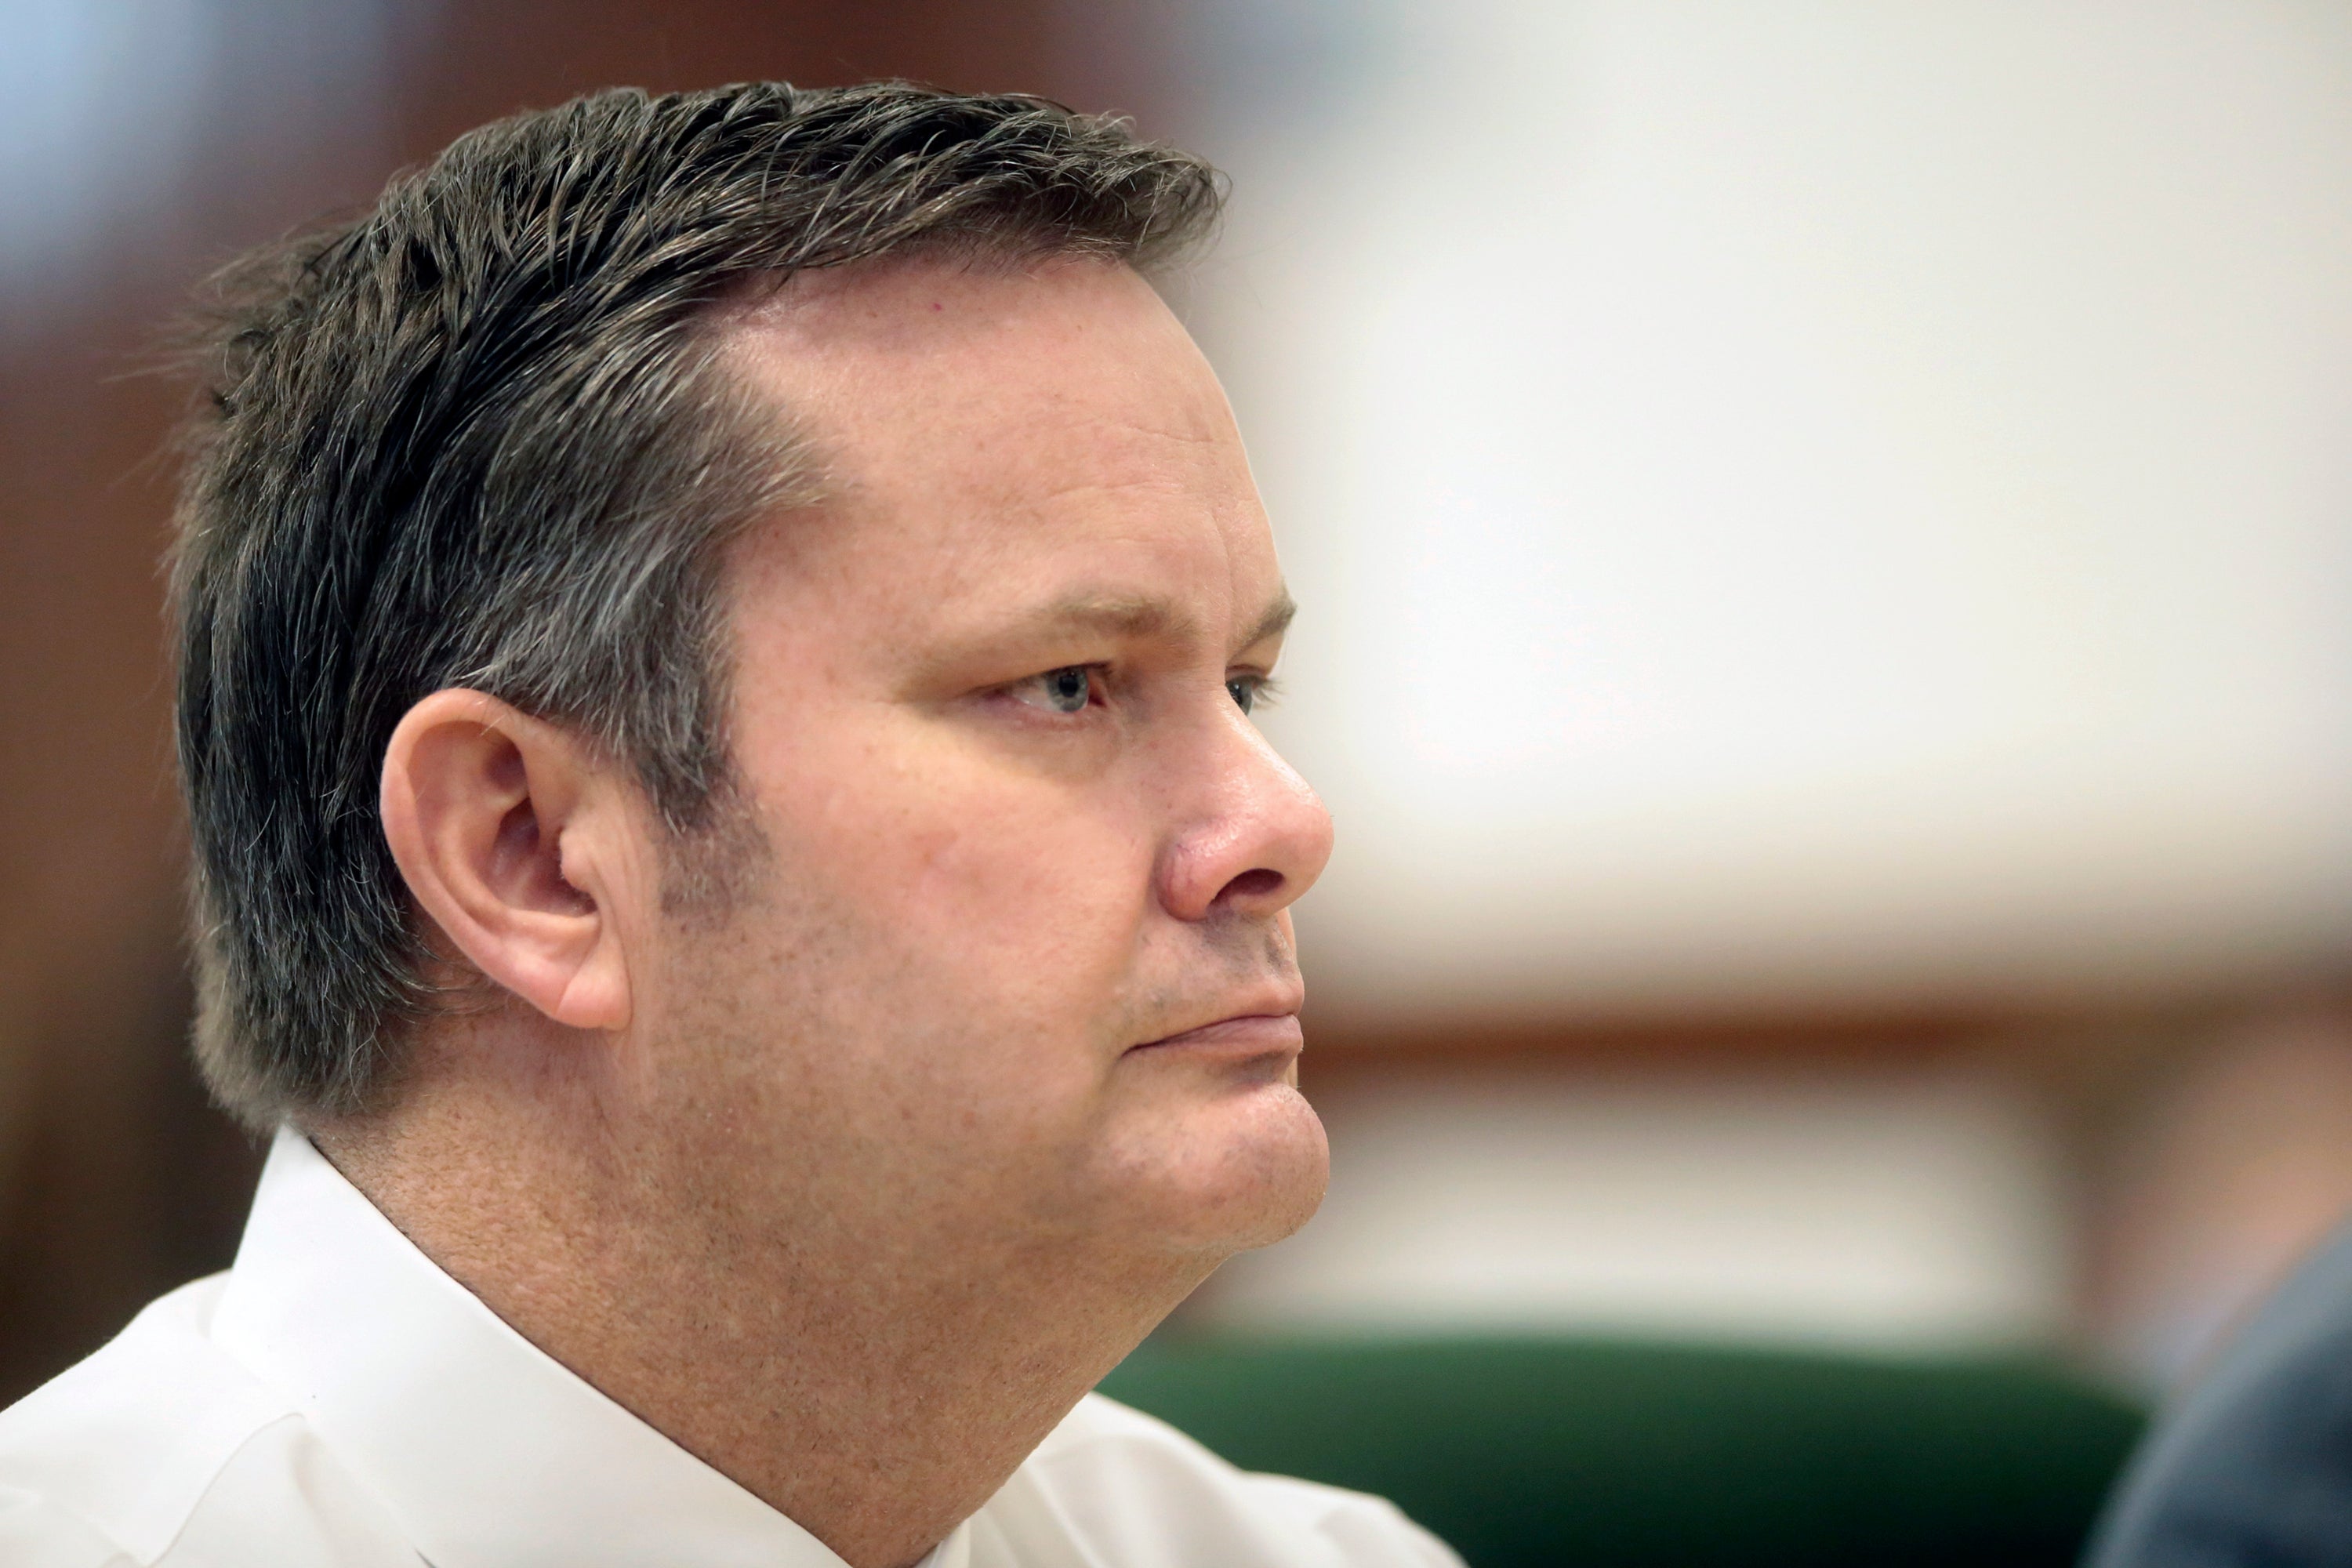 Chad Daybell appears during a court hearing in St. Anthony, Idaho, in August 2020